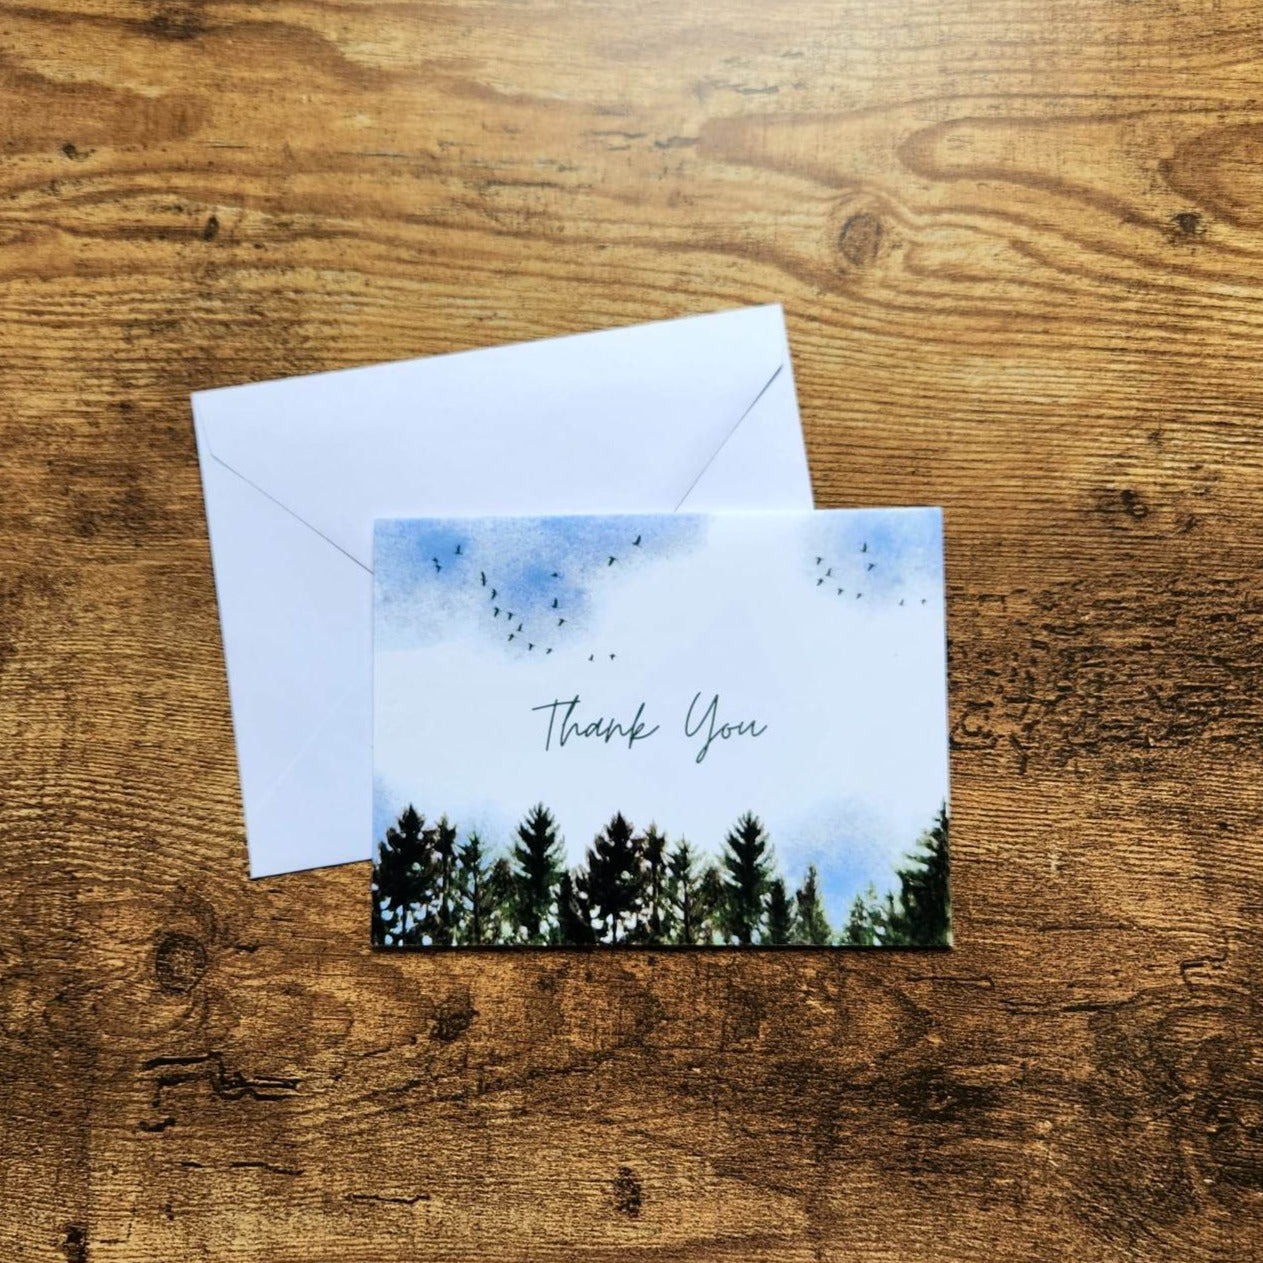 Thank you card, Outdoor nature thank you cards, Wedding greenery thank you card, Forest thank you, Friendship card, Thanks dad, Mom, Client